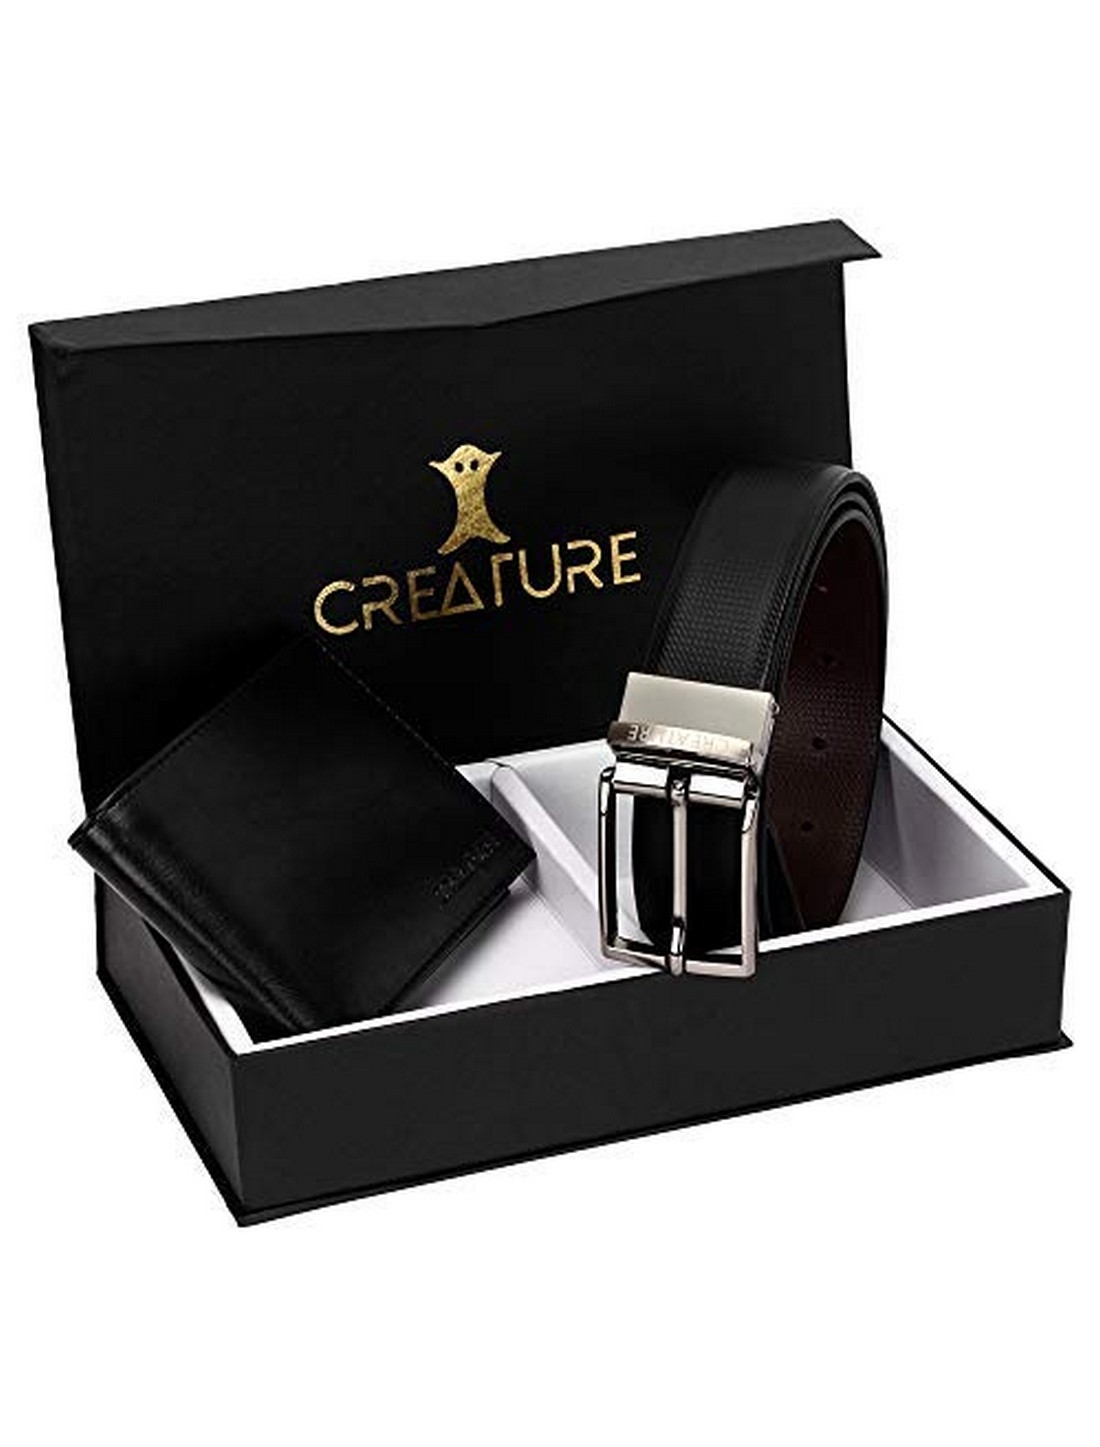 CREATURE | Creature Combo of Black Color Wallet for Men and Black and Brown Reversible Belt for Men - Gift Set